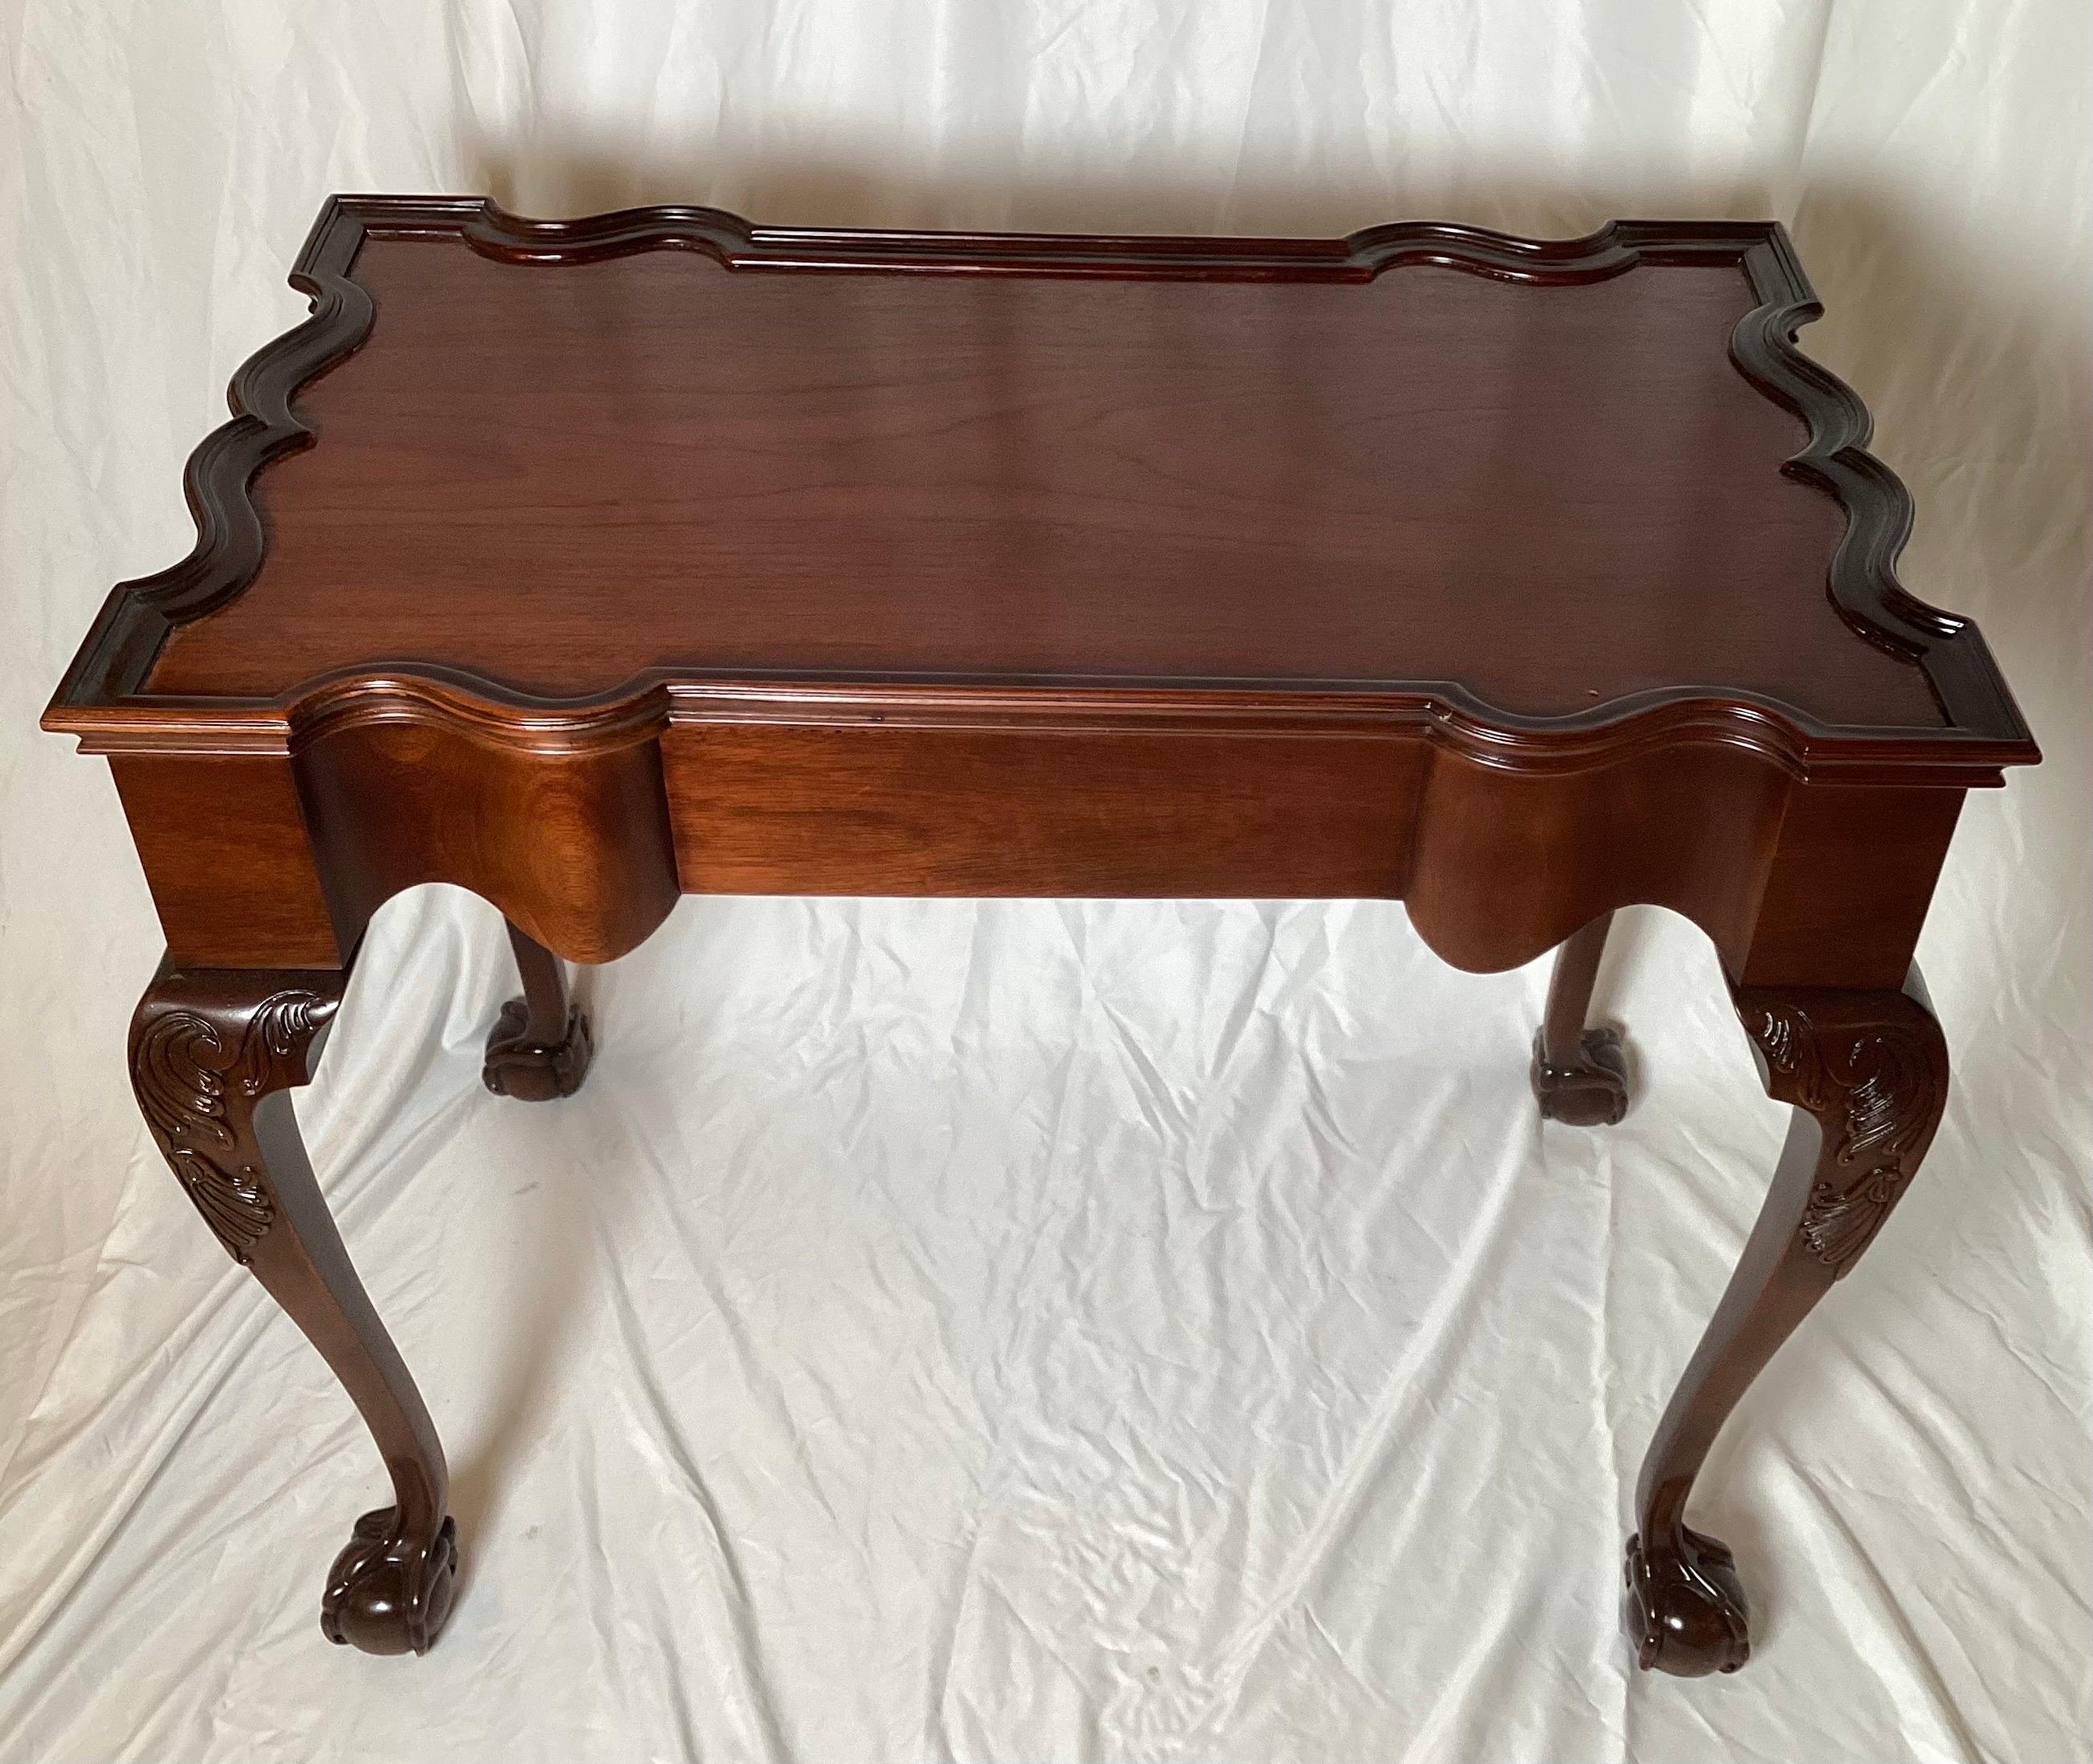 A beautiful reproduction tea table of the famous Newport Rhode Island John Goddard rectangular pie crust edge table.  Elegant shape and proportions with the classic carved legs with ball and claw feet with the talon claw opening around the ball